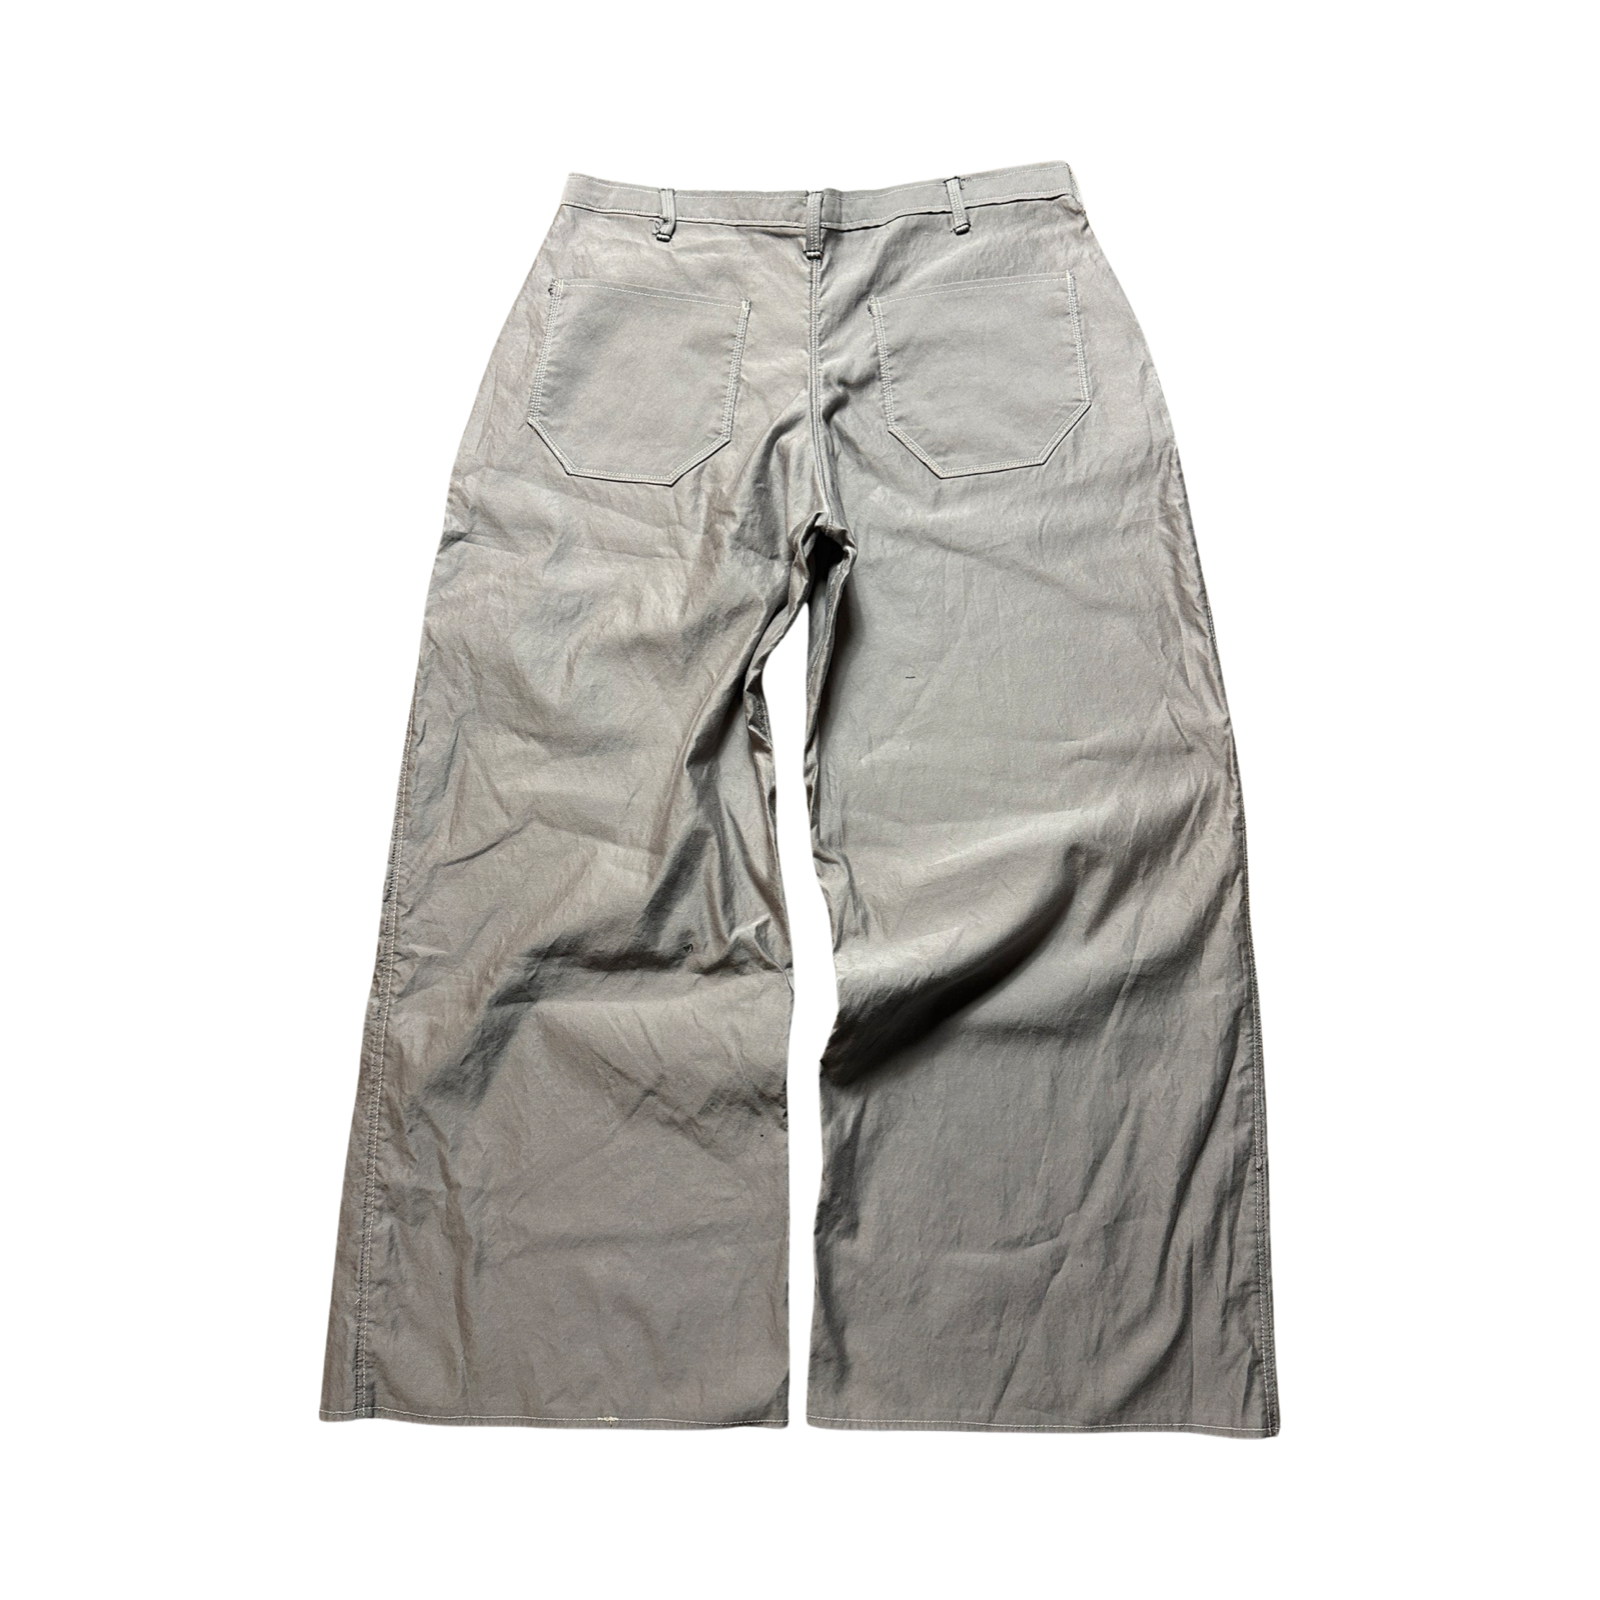 Cut and Sew Baggy Fit Pants Gray 34x29